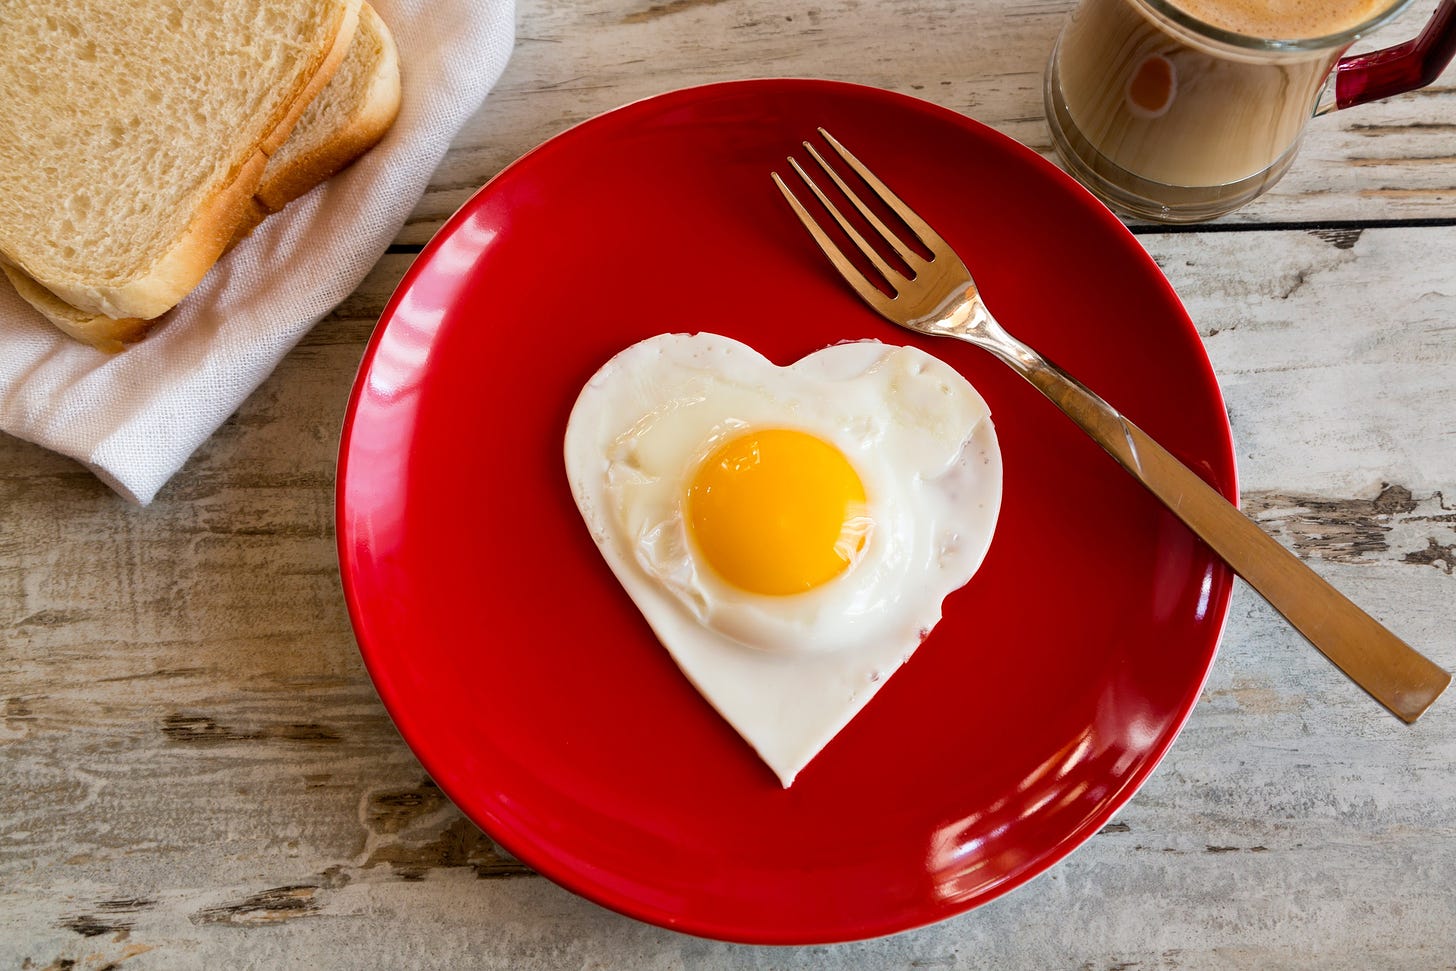 A heartshaped egg on a red plate 